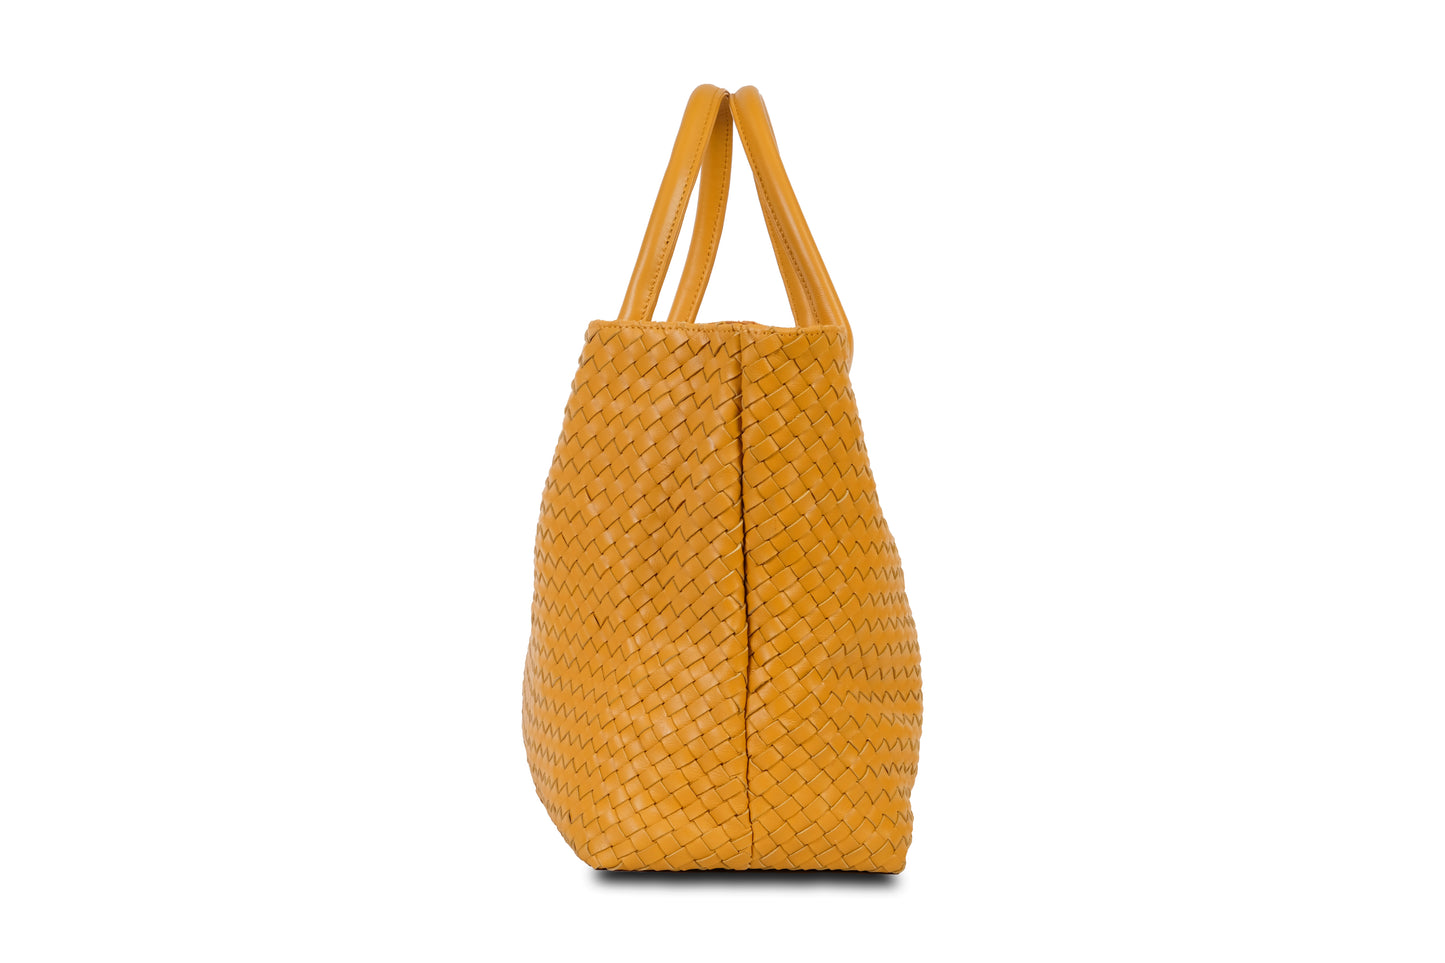 Destarina Autumn Yellow Crosshatch Leather Tote Bag Handbag made by Dewi Maya side view available at the best boutique in Upstate South Carolina Spartanburg Greenville Dewi Maya Boutique